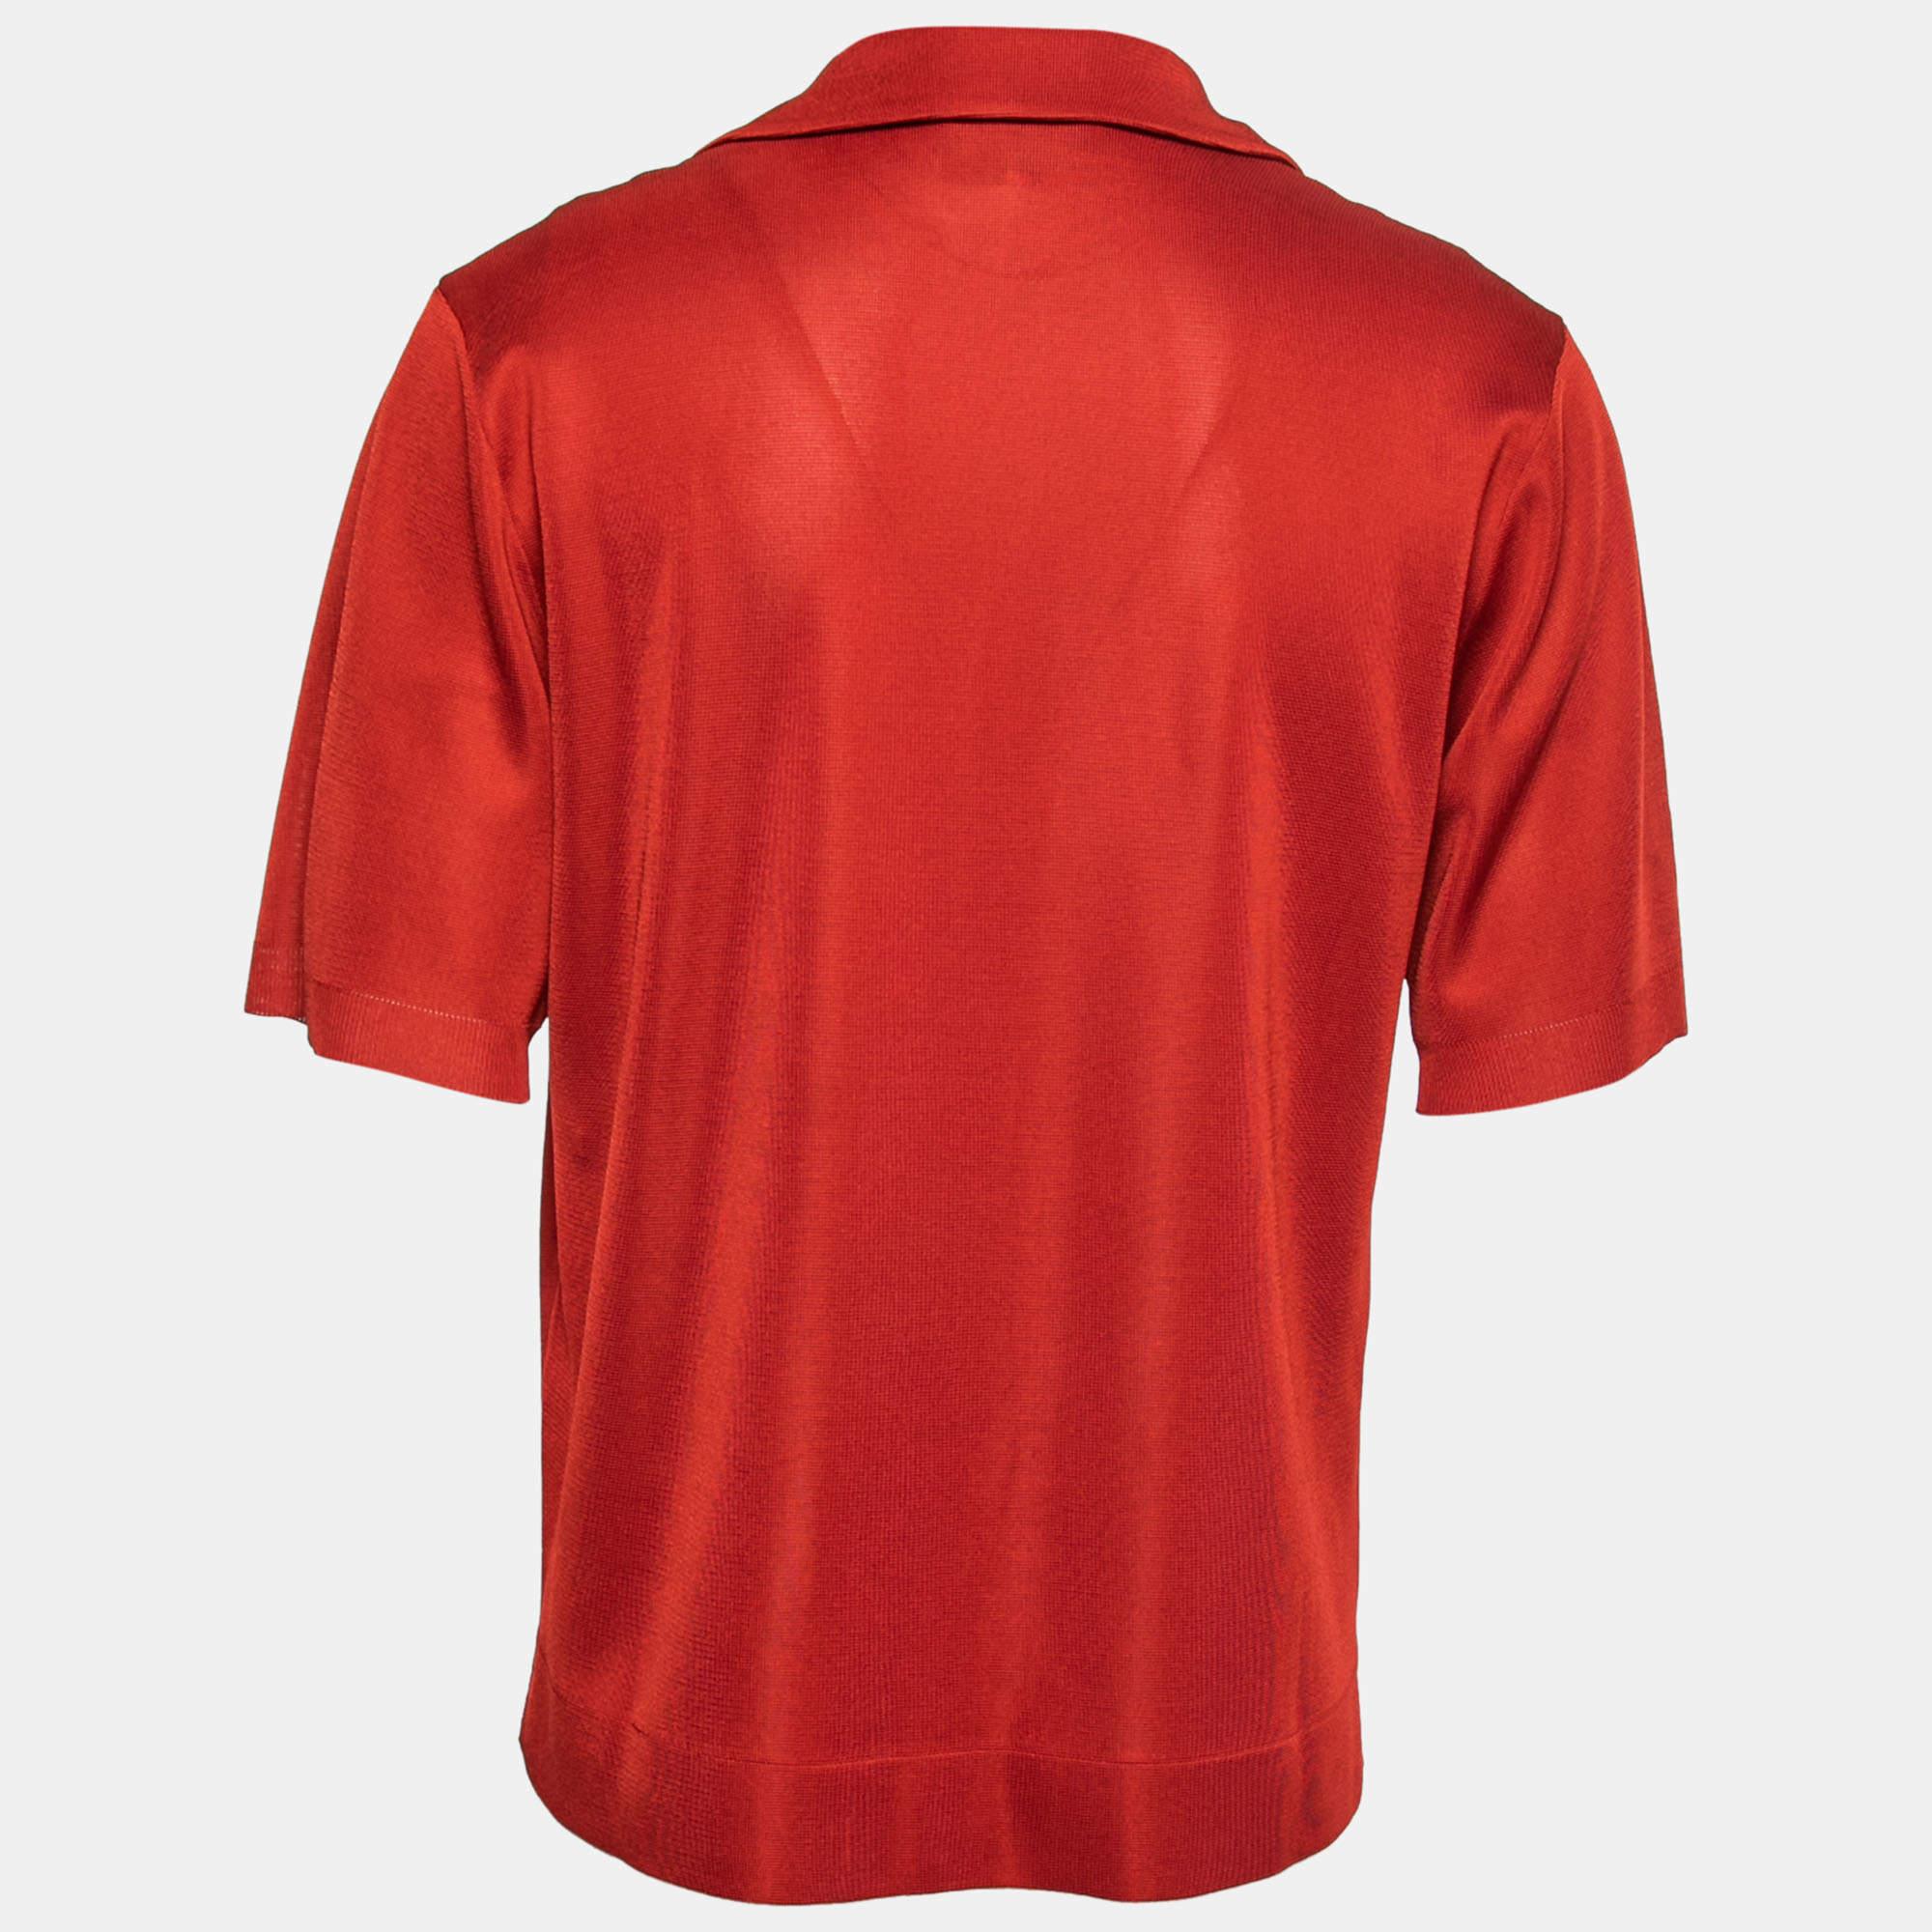 Create an elevated style statement by wearing this shirt from Gucci X Adidas. It has a well-fitted shape that is made from red knit fabric, which flaunts the signature GG Monogram. It comes with short sleeves, buttoned closures, and neat collars.

